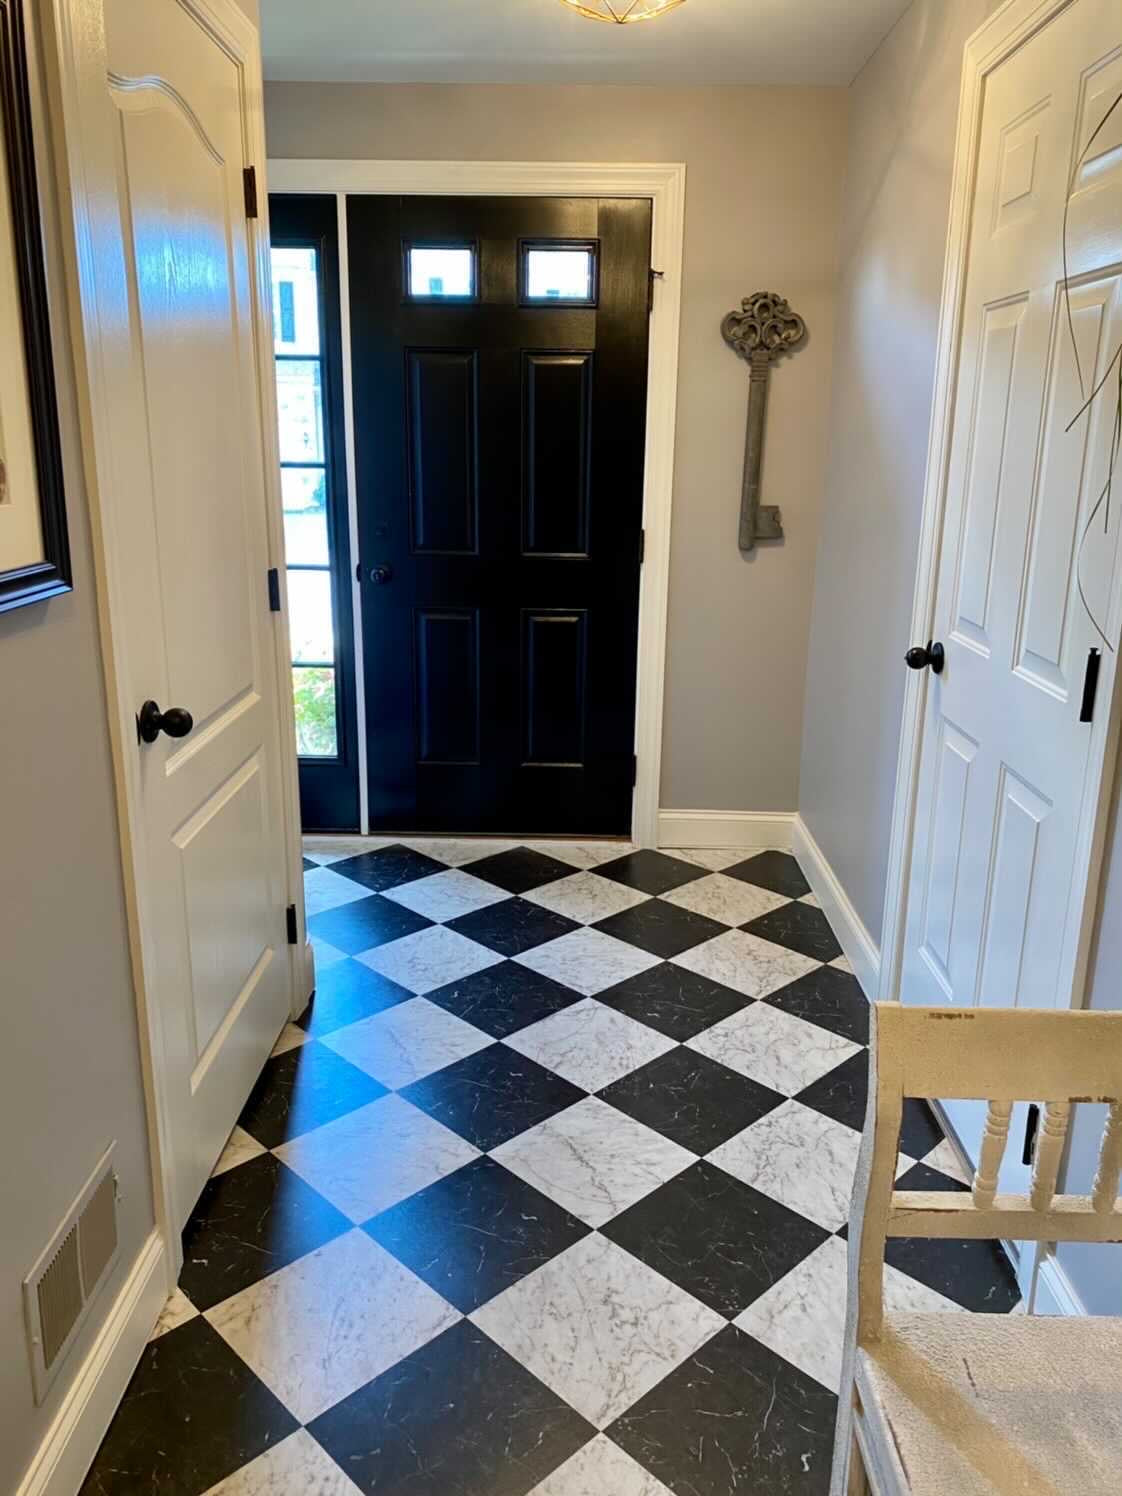 Black & white checkered floor for an entryway